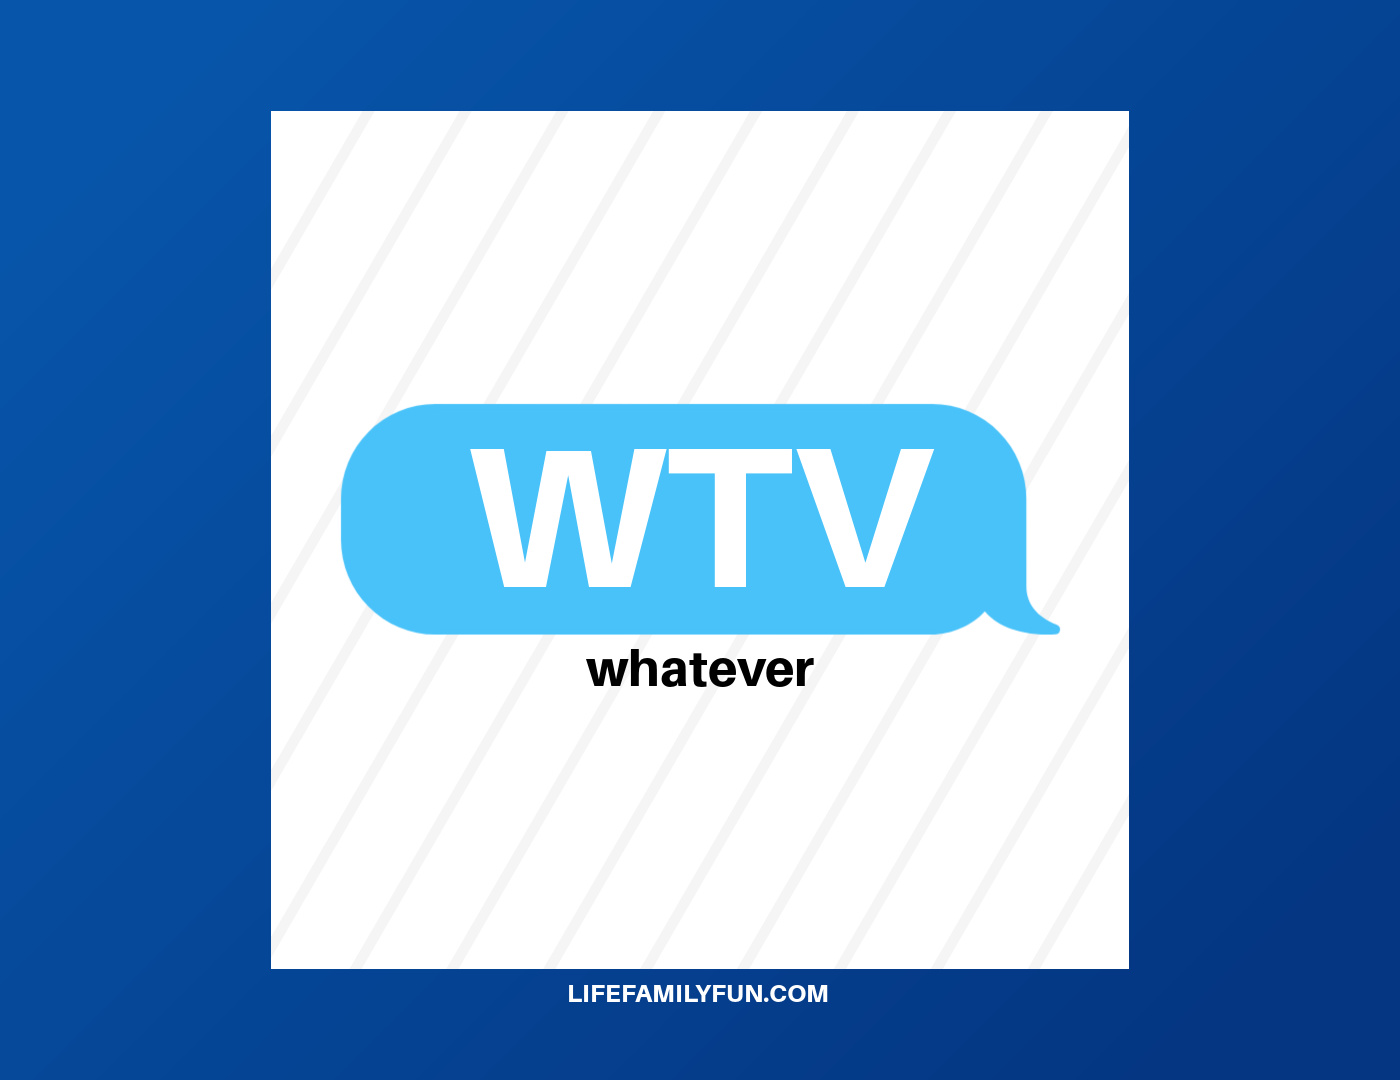 What does WTV mean?